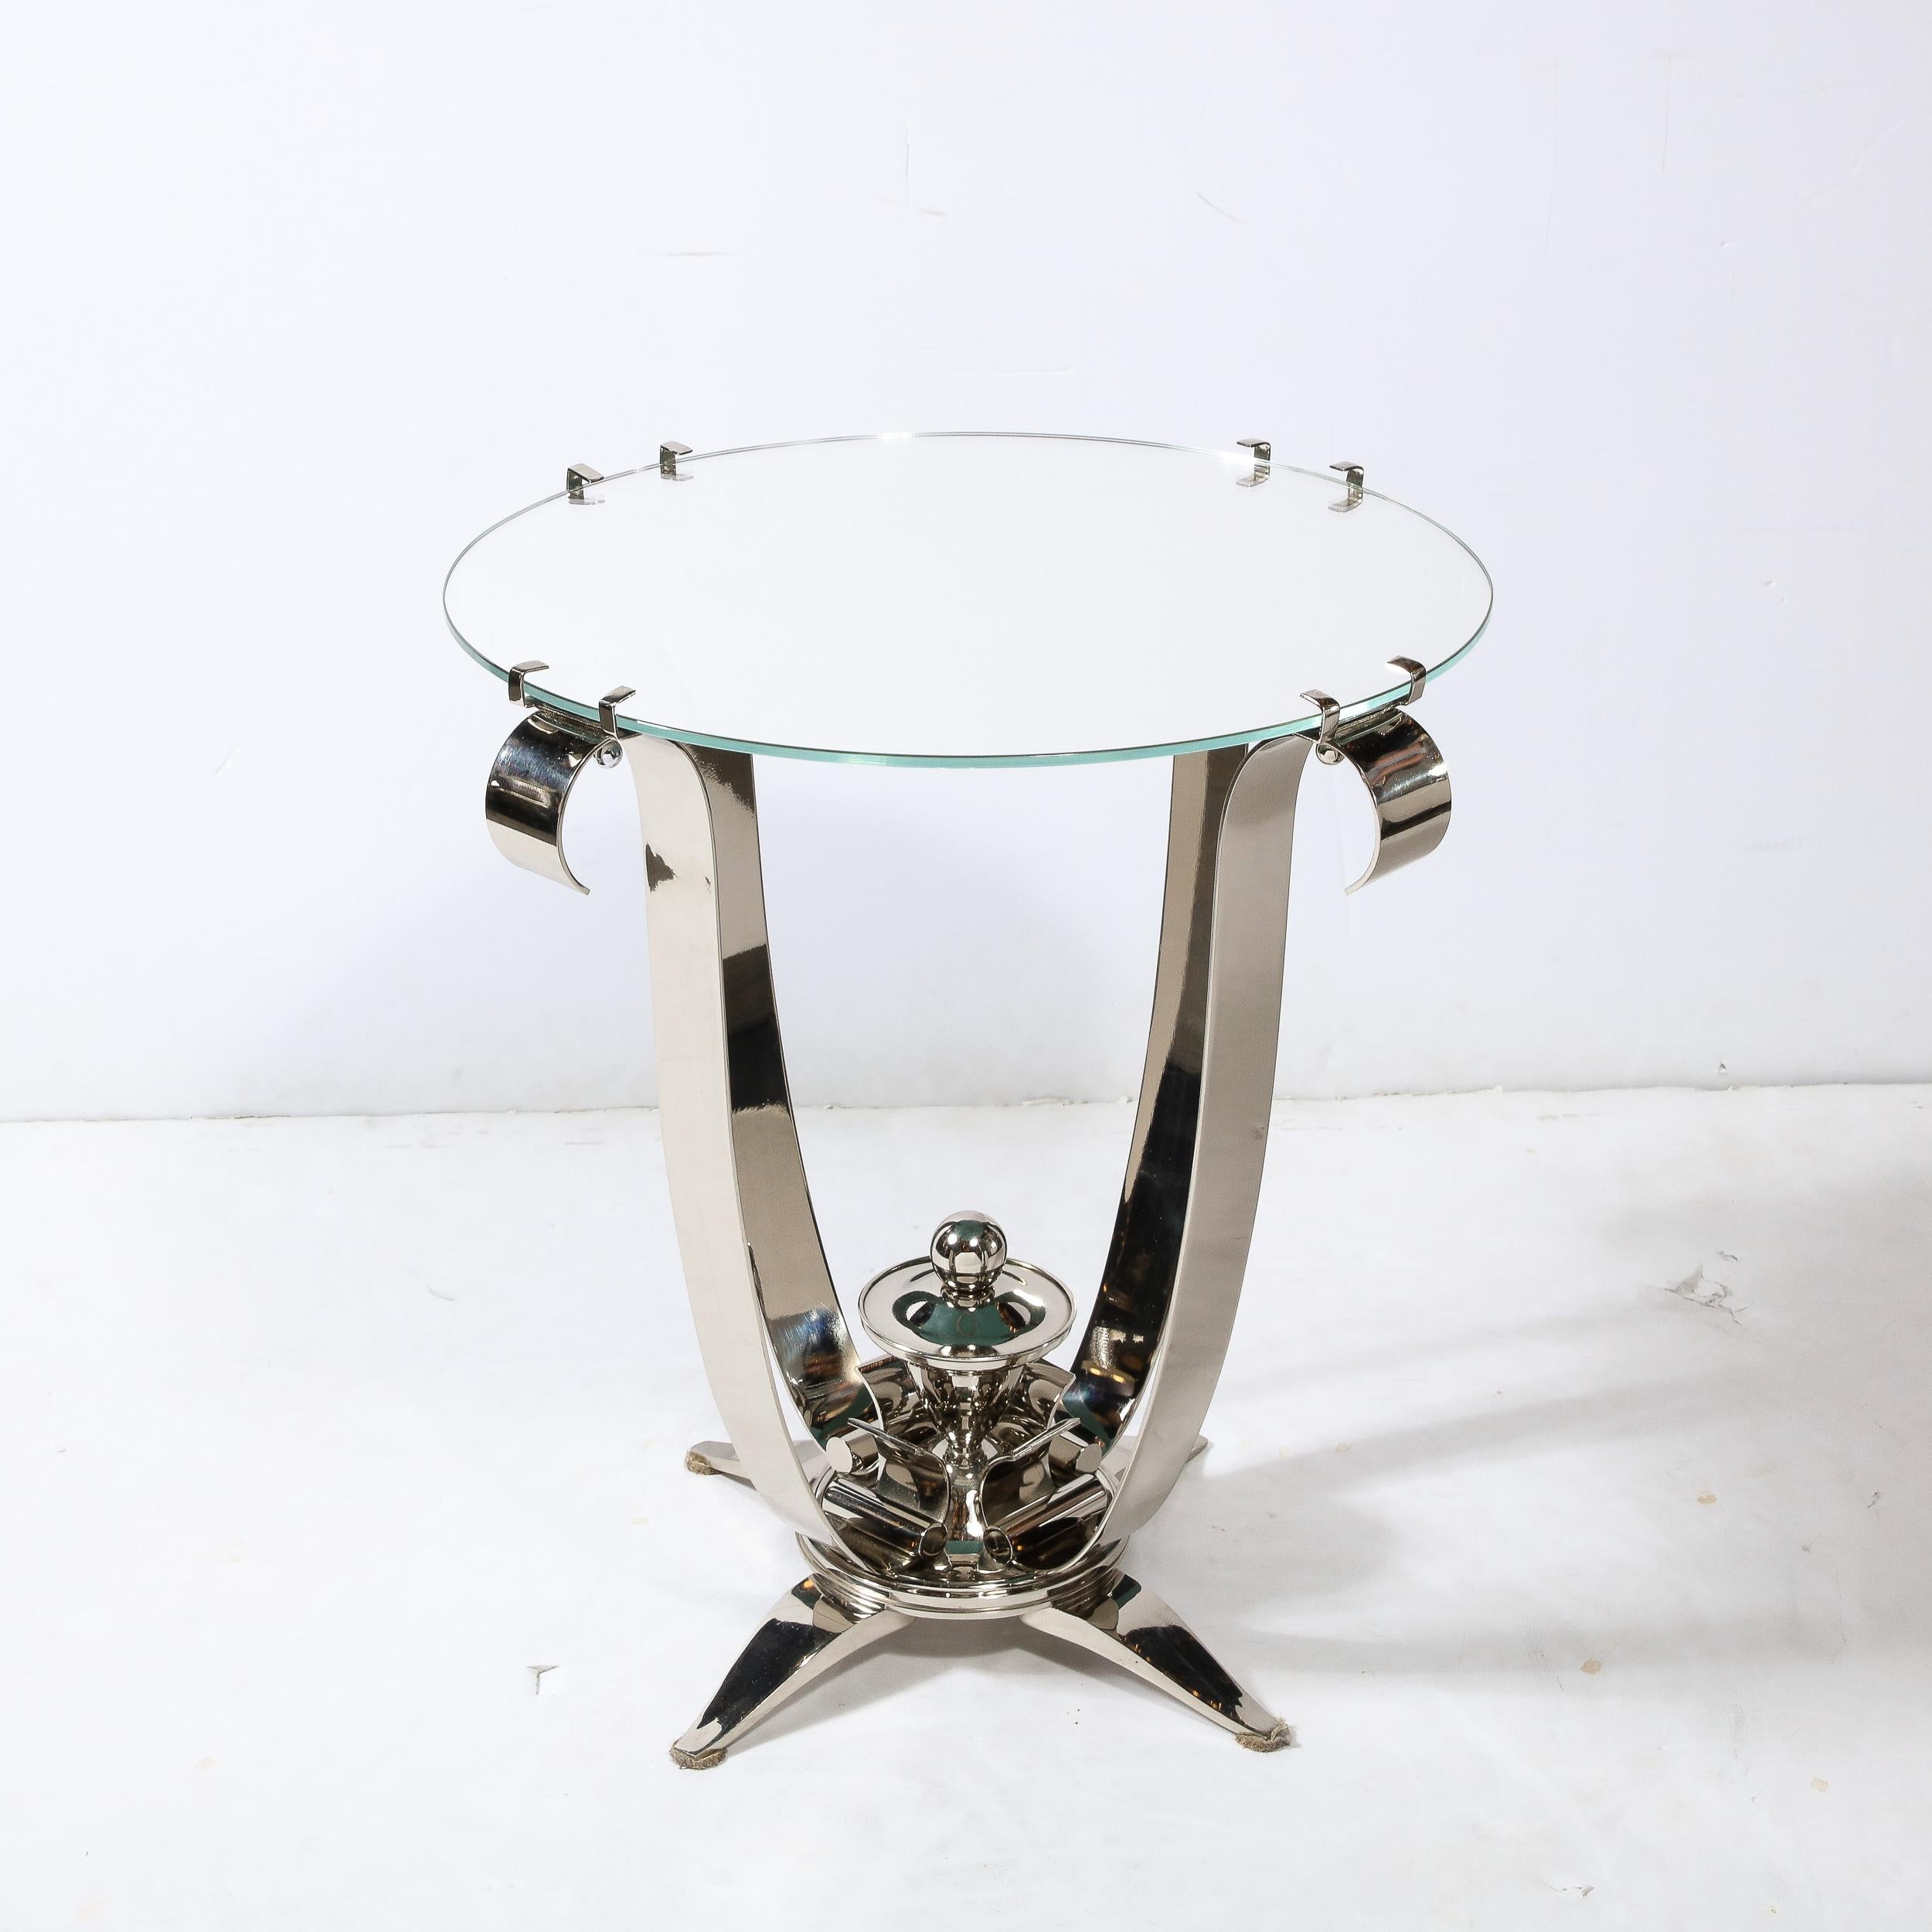 20th Century Art Deco Style Polished  Nickel Side/End Table With A Round Mirror Top For Sale